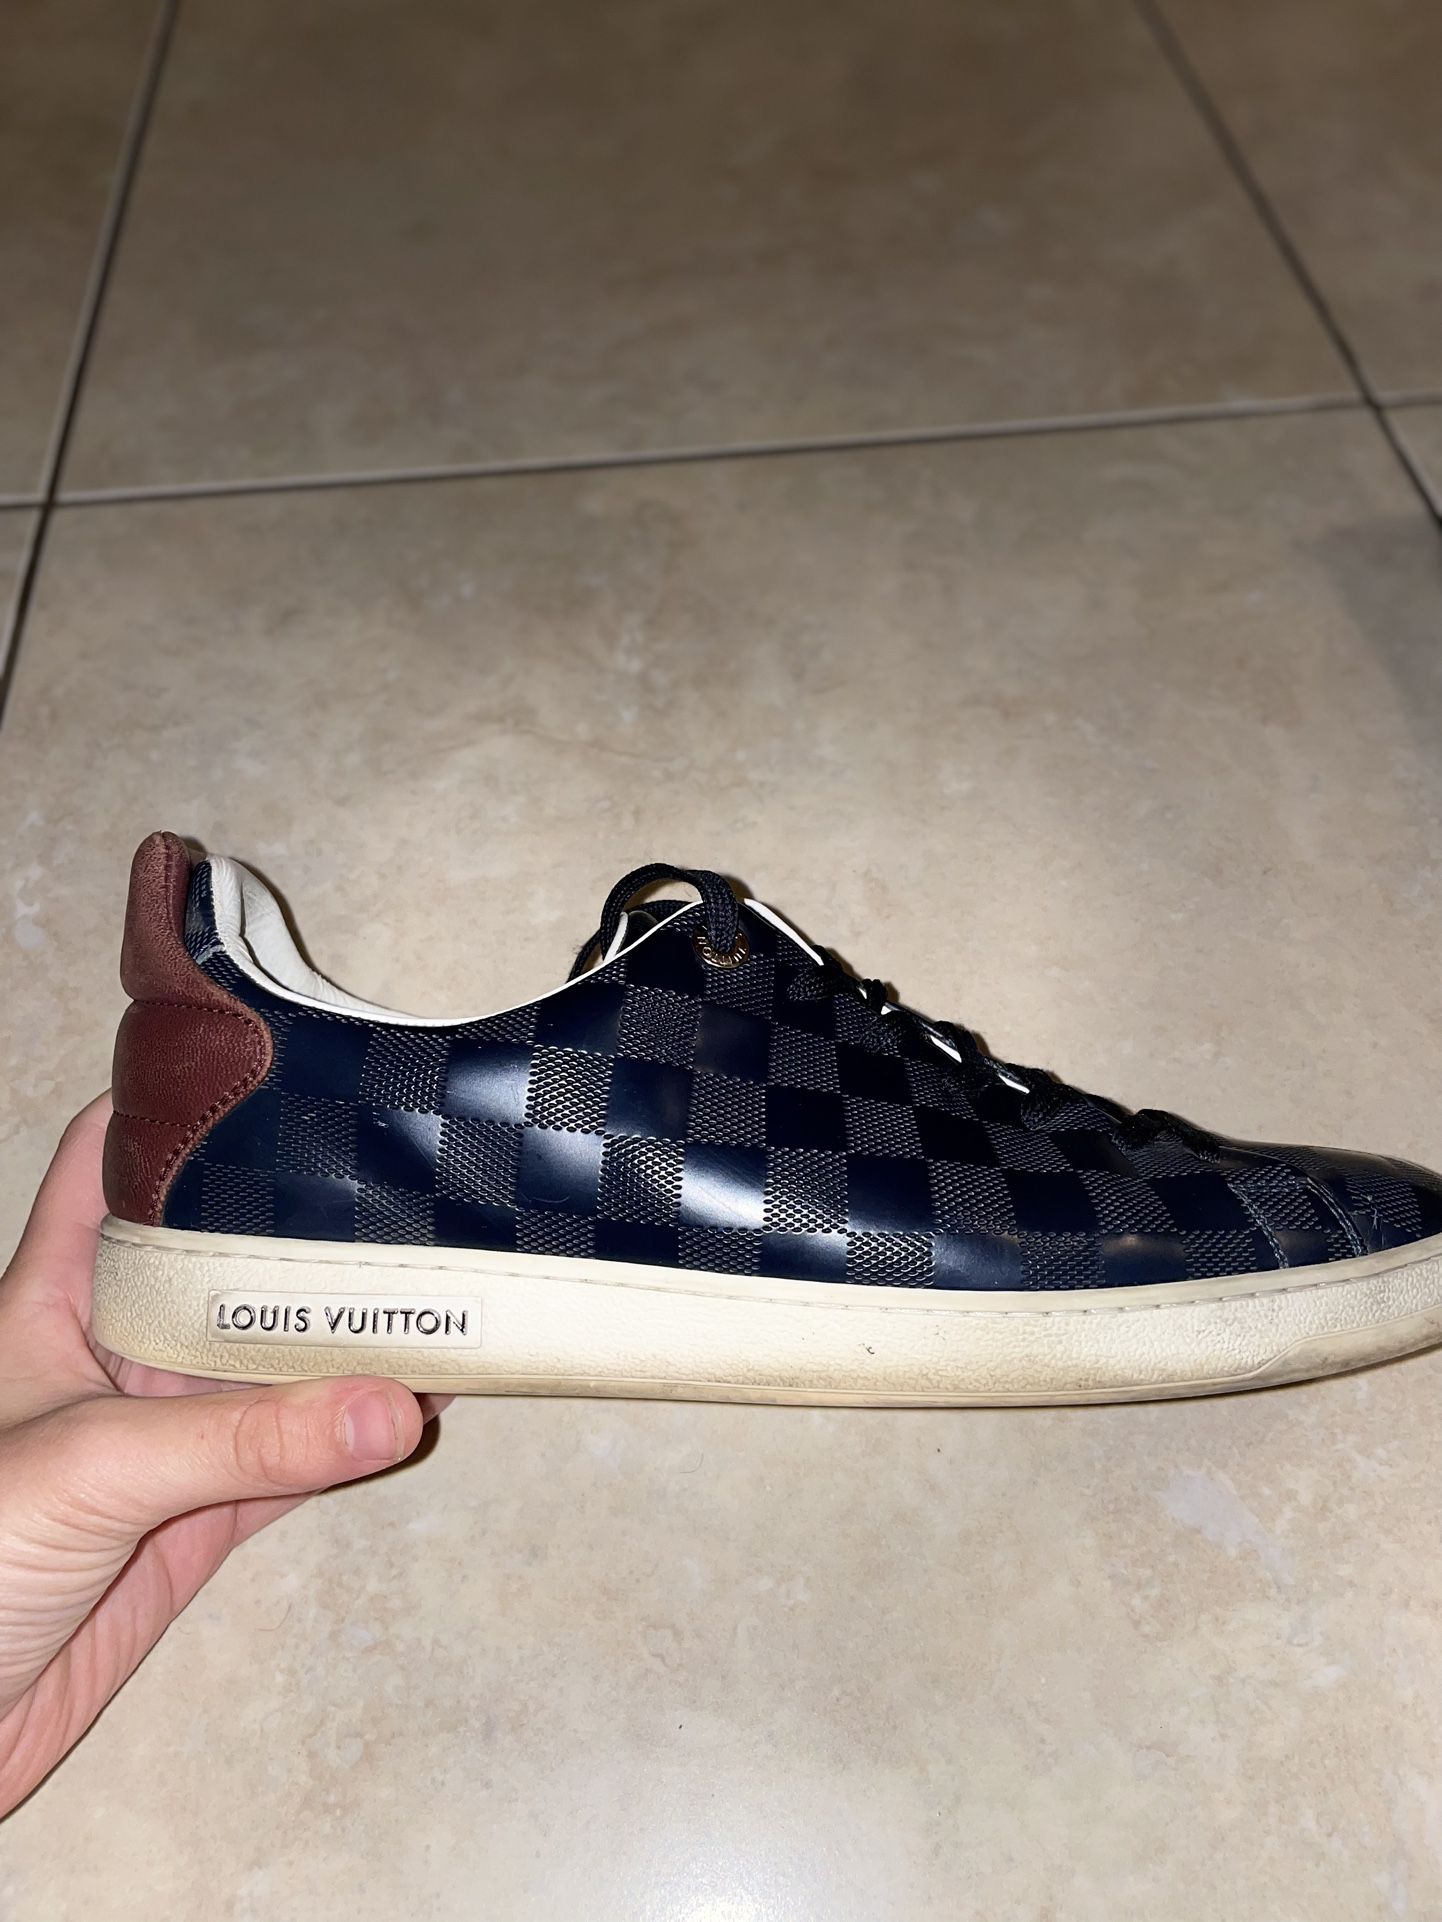 Louis Vuitton Size 8 1/2 Men's Shoe for Sale in Queens, NY - OfferUp